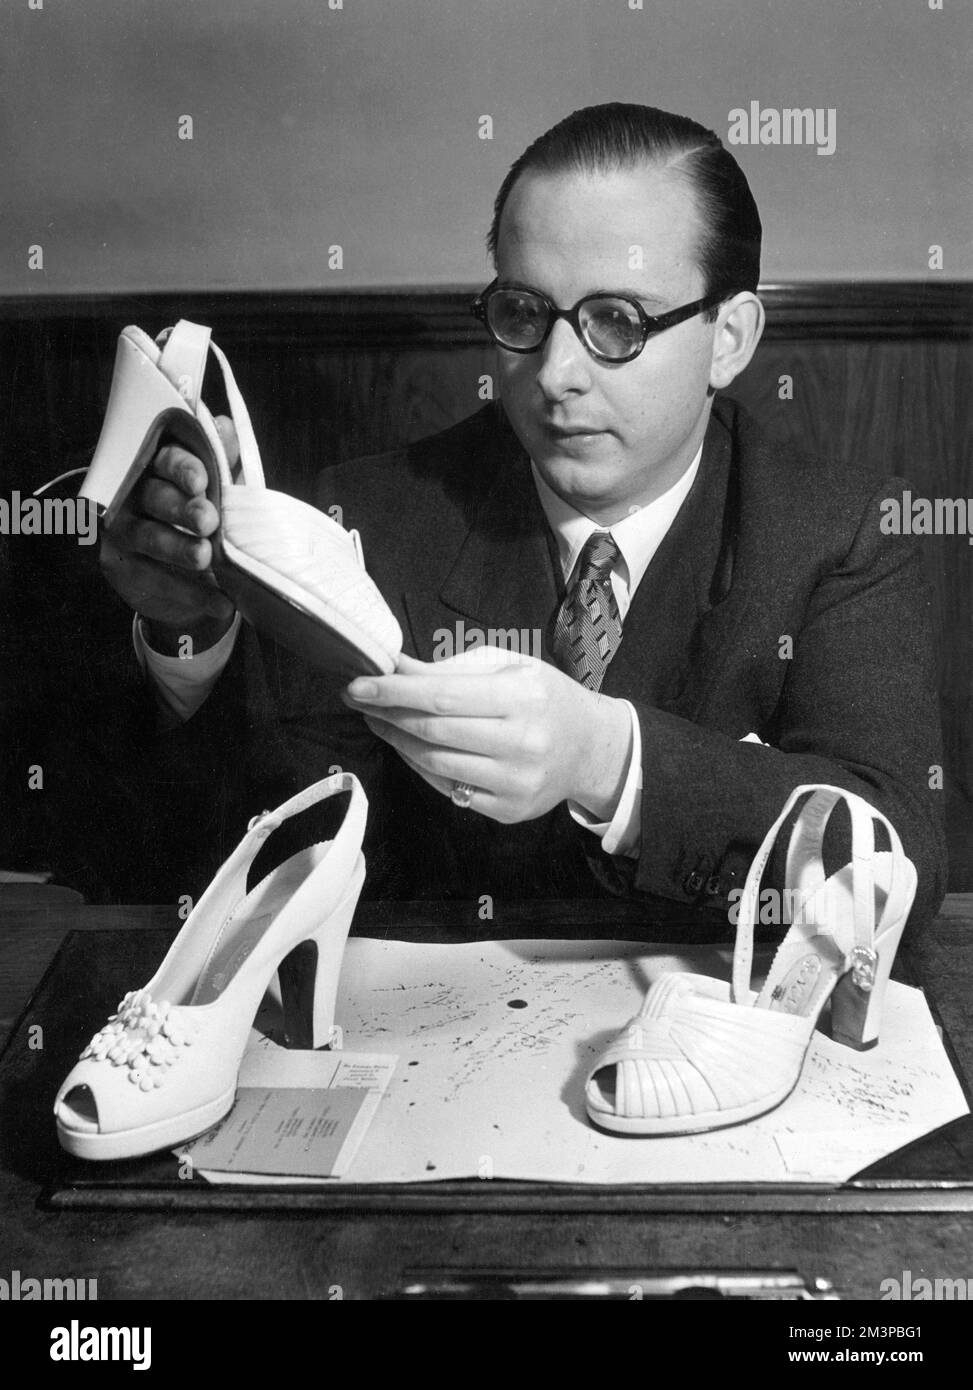 Edward Rayne of the famous Rayne shoe dynasty, founded by his grandparents in 1889 and shoemakers to royalty, contemplating a pair of the firm's shoes in the 1950s.       Date: 1952 Stock Photo